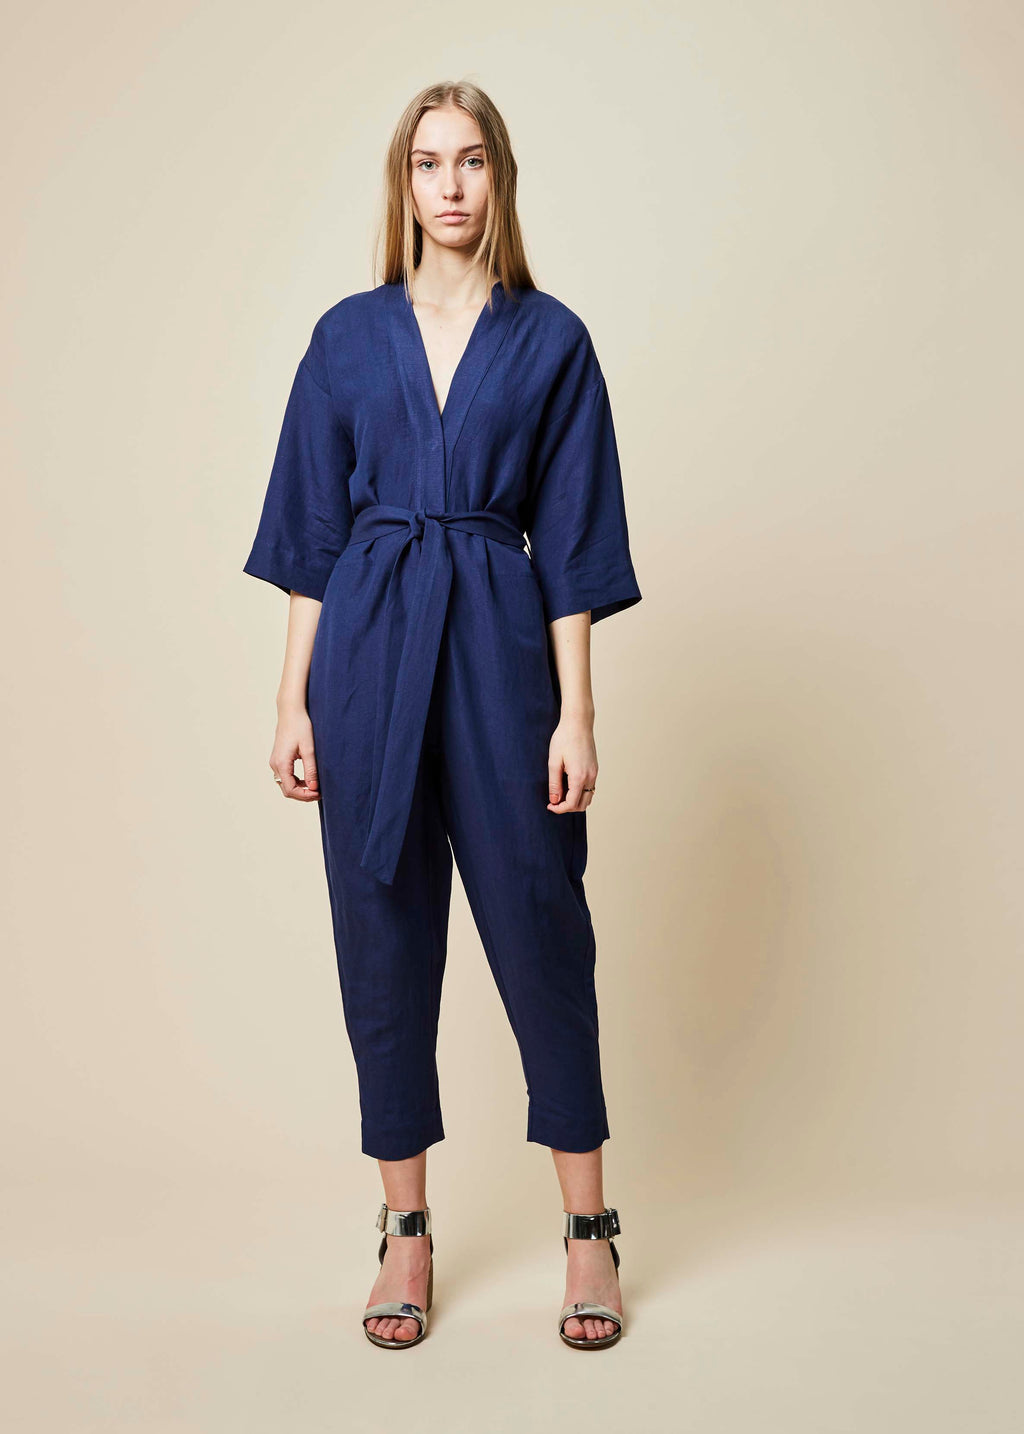 Women's New Arrivals – Tagged 